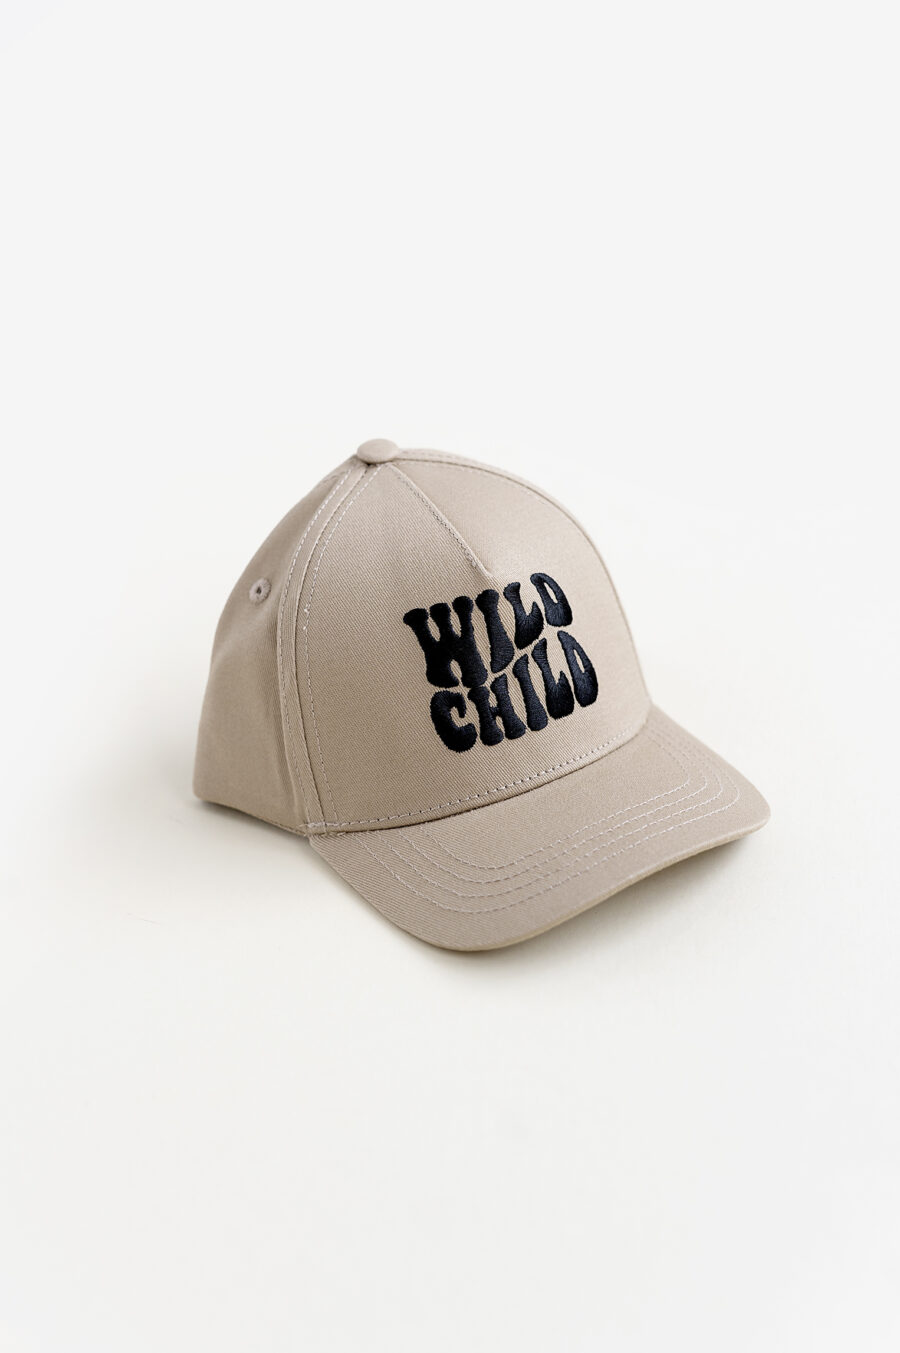 A ran snapback by rad toddler. The front of the hat says WILD CHILD and Comes in different sizes and looks very stylish